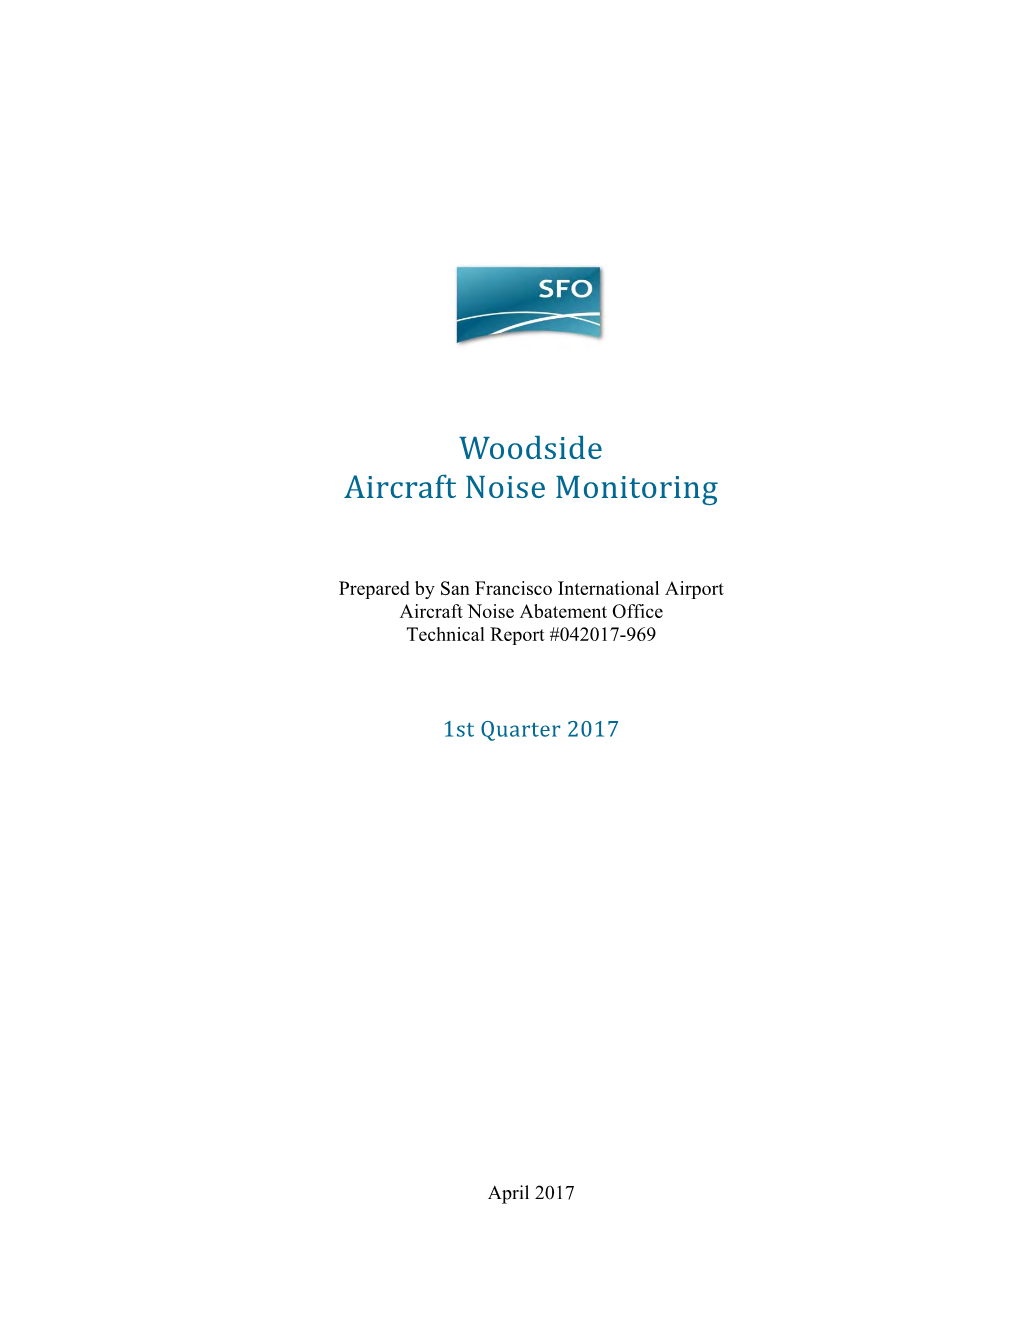 Woodside Aircraft Noise Monitoring